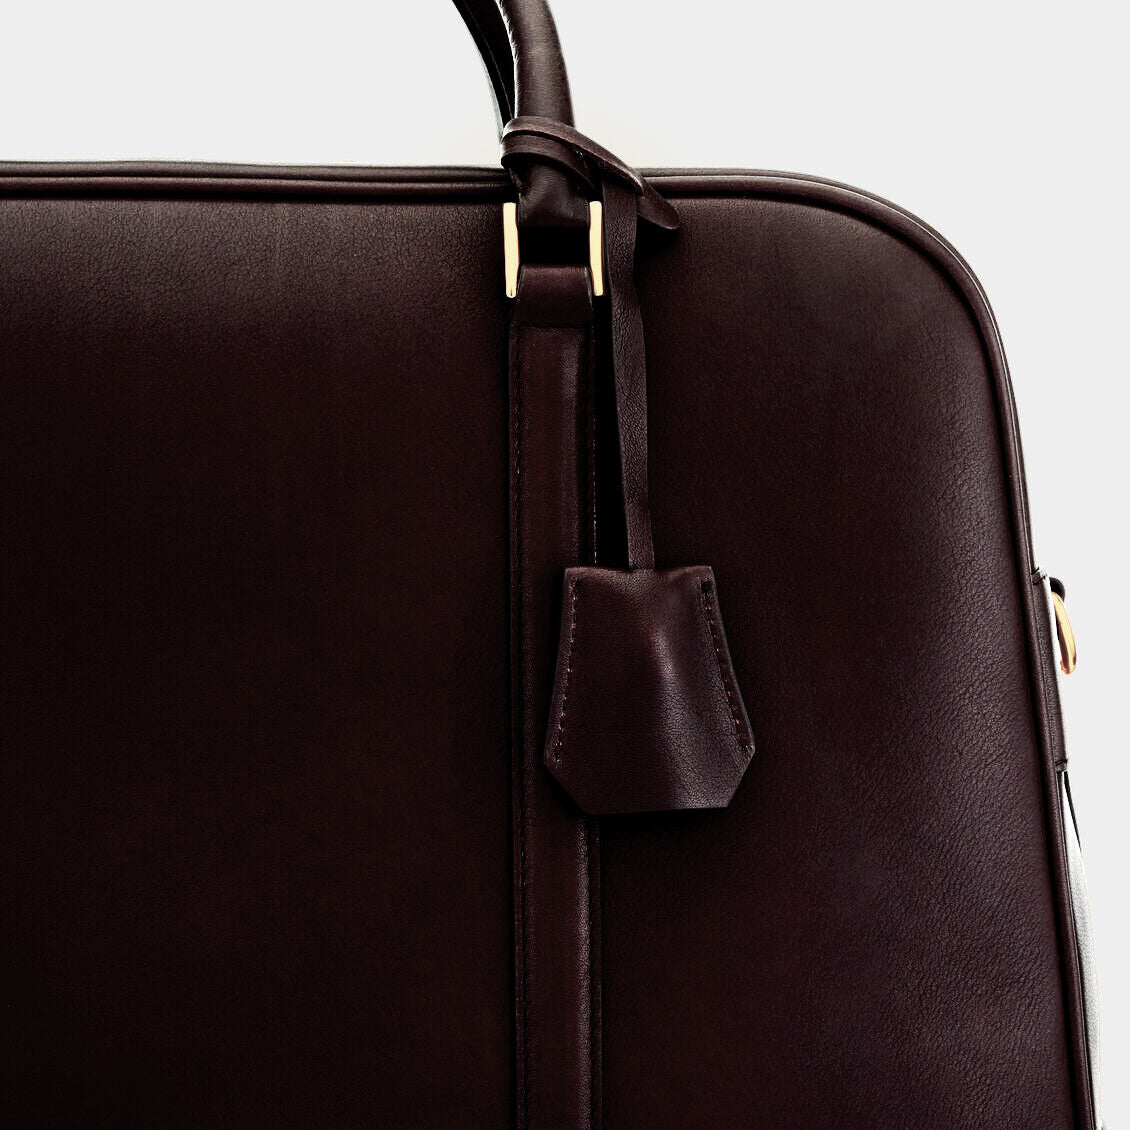 Bespoke Latimer -

                  
                    Butter Leather in Chocolate -
                  

                  Anya Hindmarch UK
